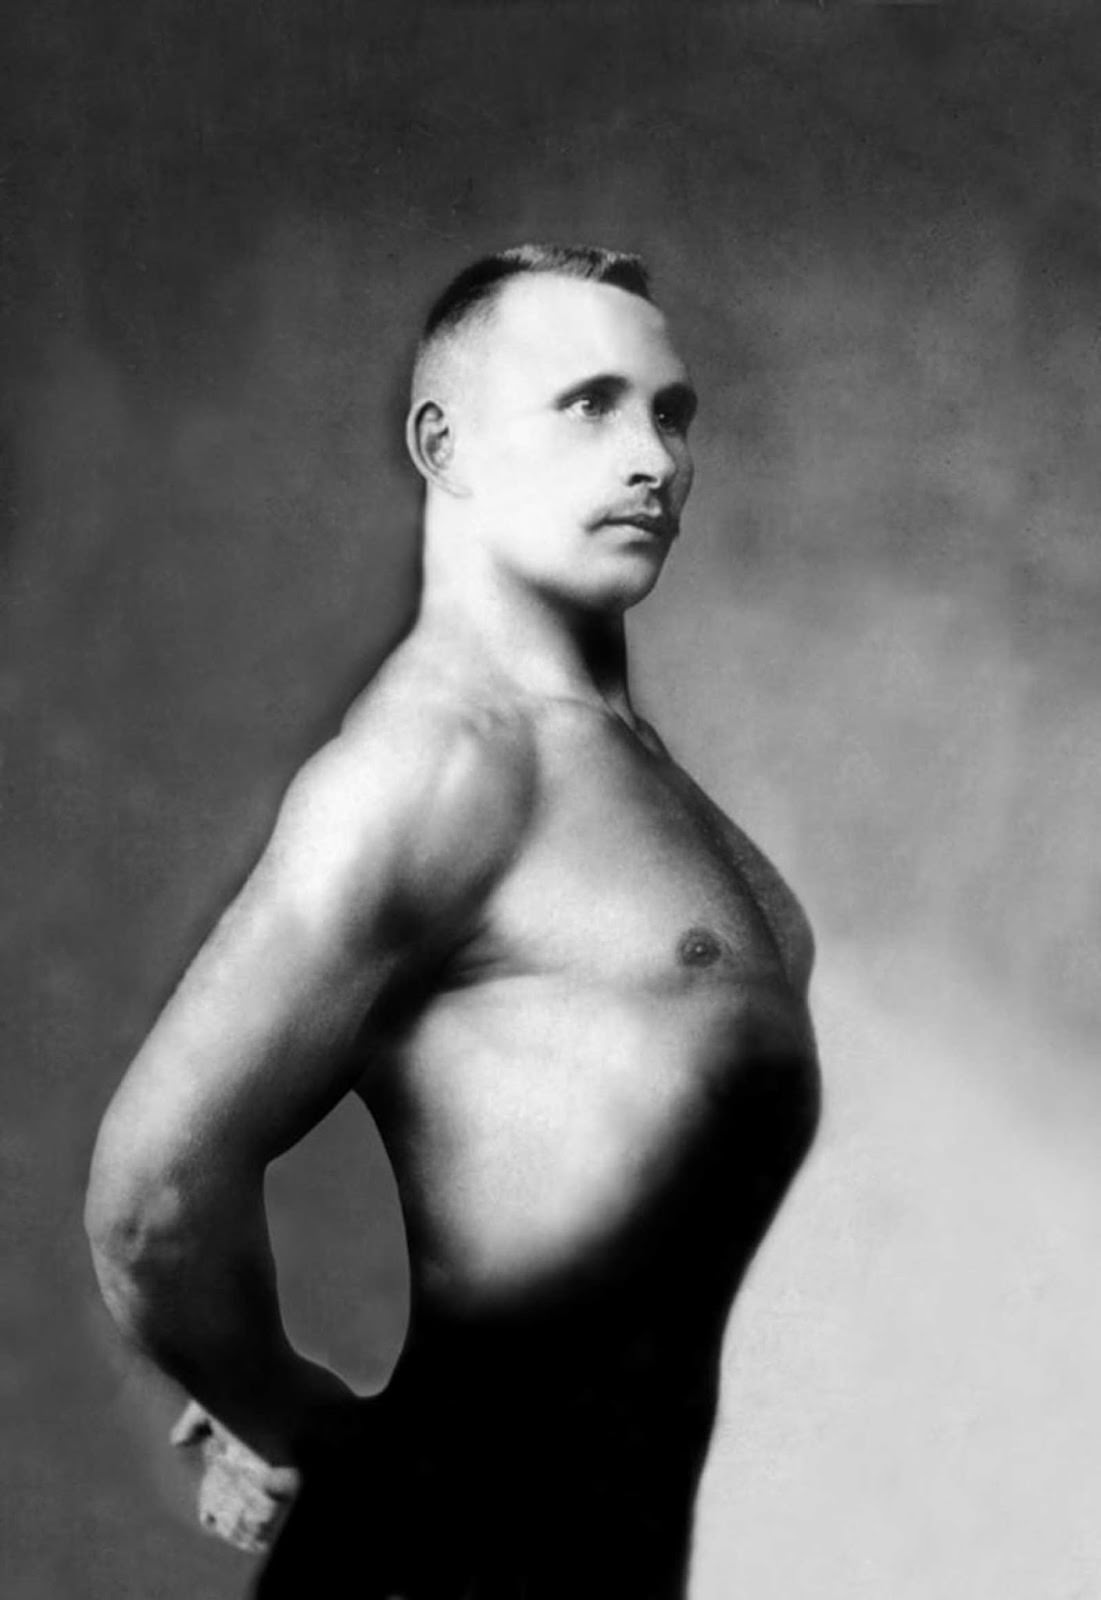 A Russian bodybuilder, photographed in a studio, 1900.